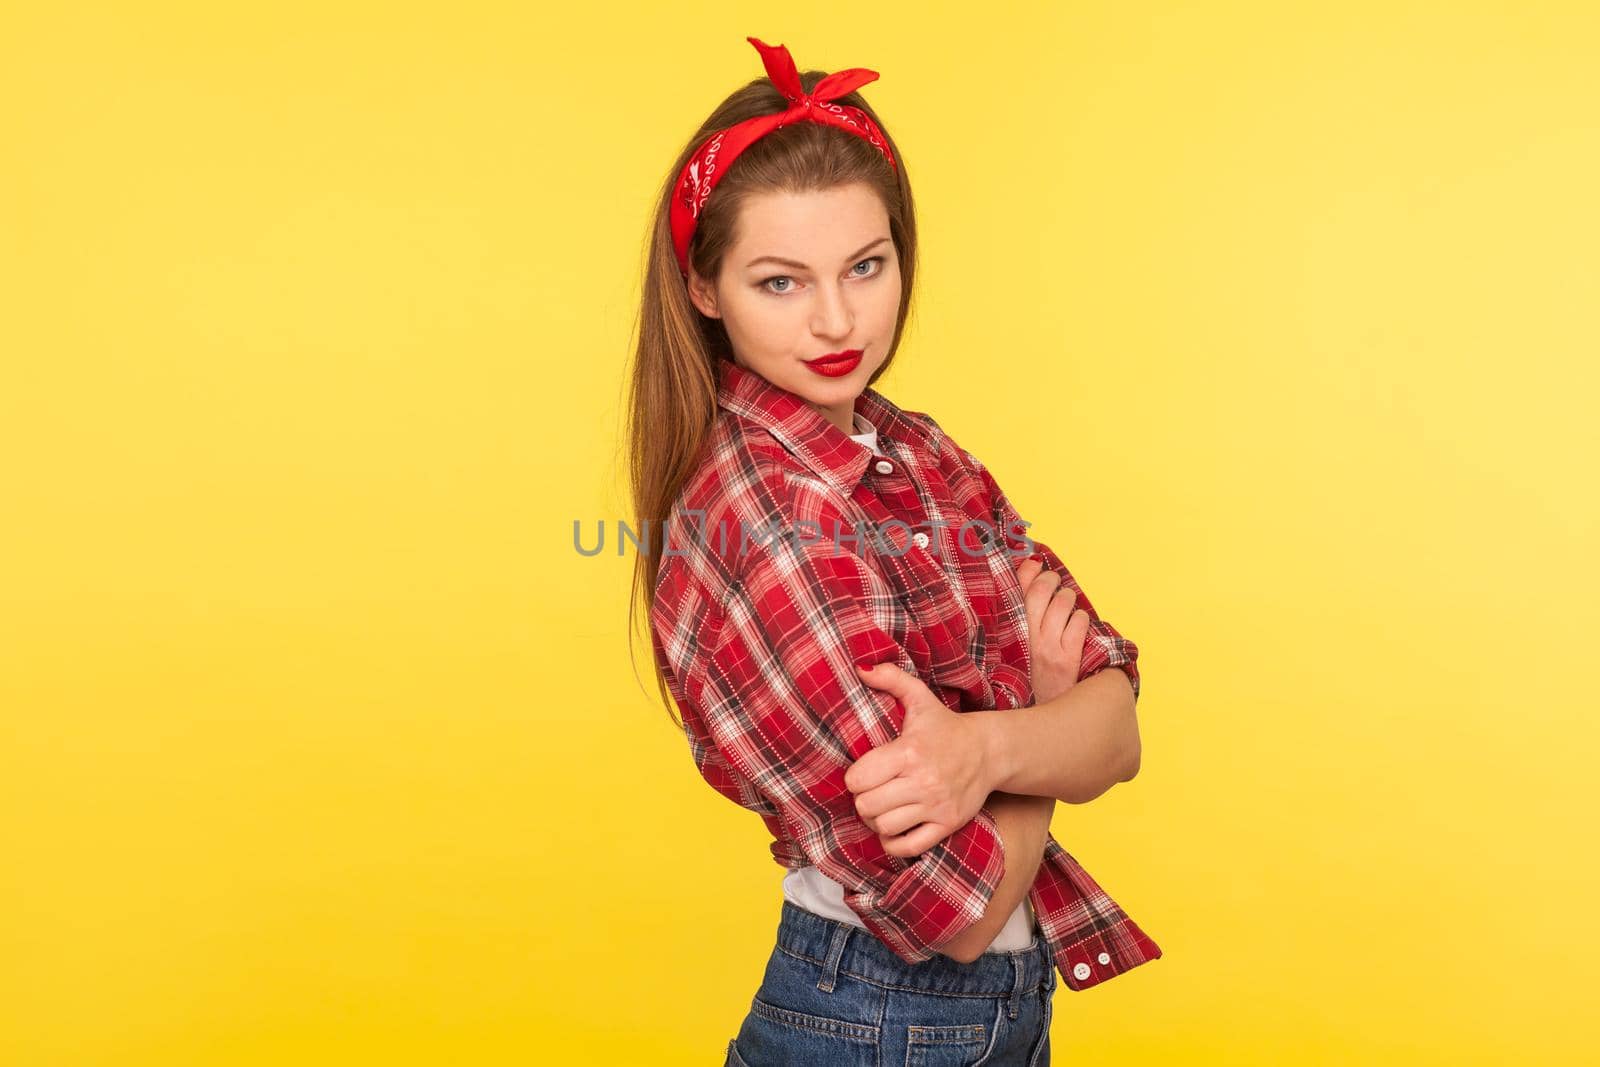 Portrait of sexy pinup girl with bright makeup, red lipstick, wearing checkered shirt and headband, standing with crossed hands and looking seductively, retro vintage 50's style. studio shot isolated